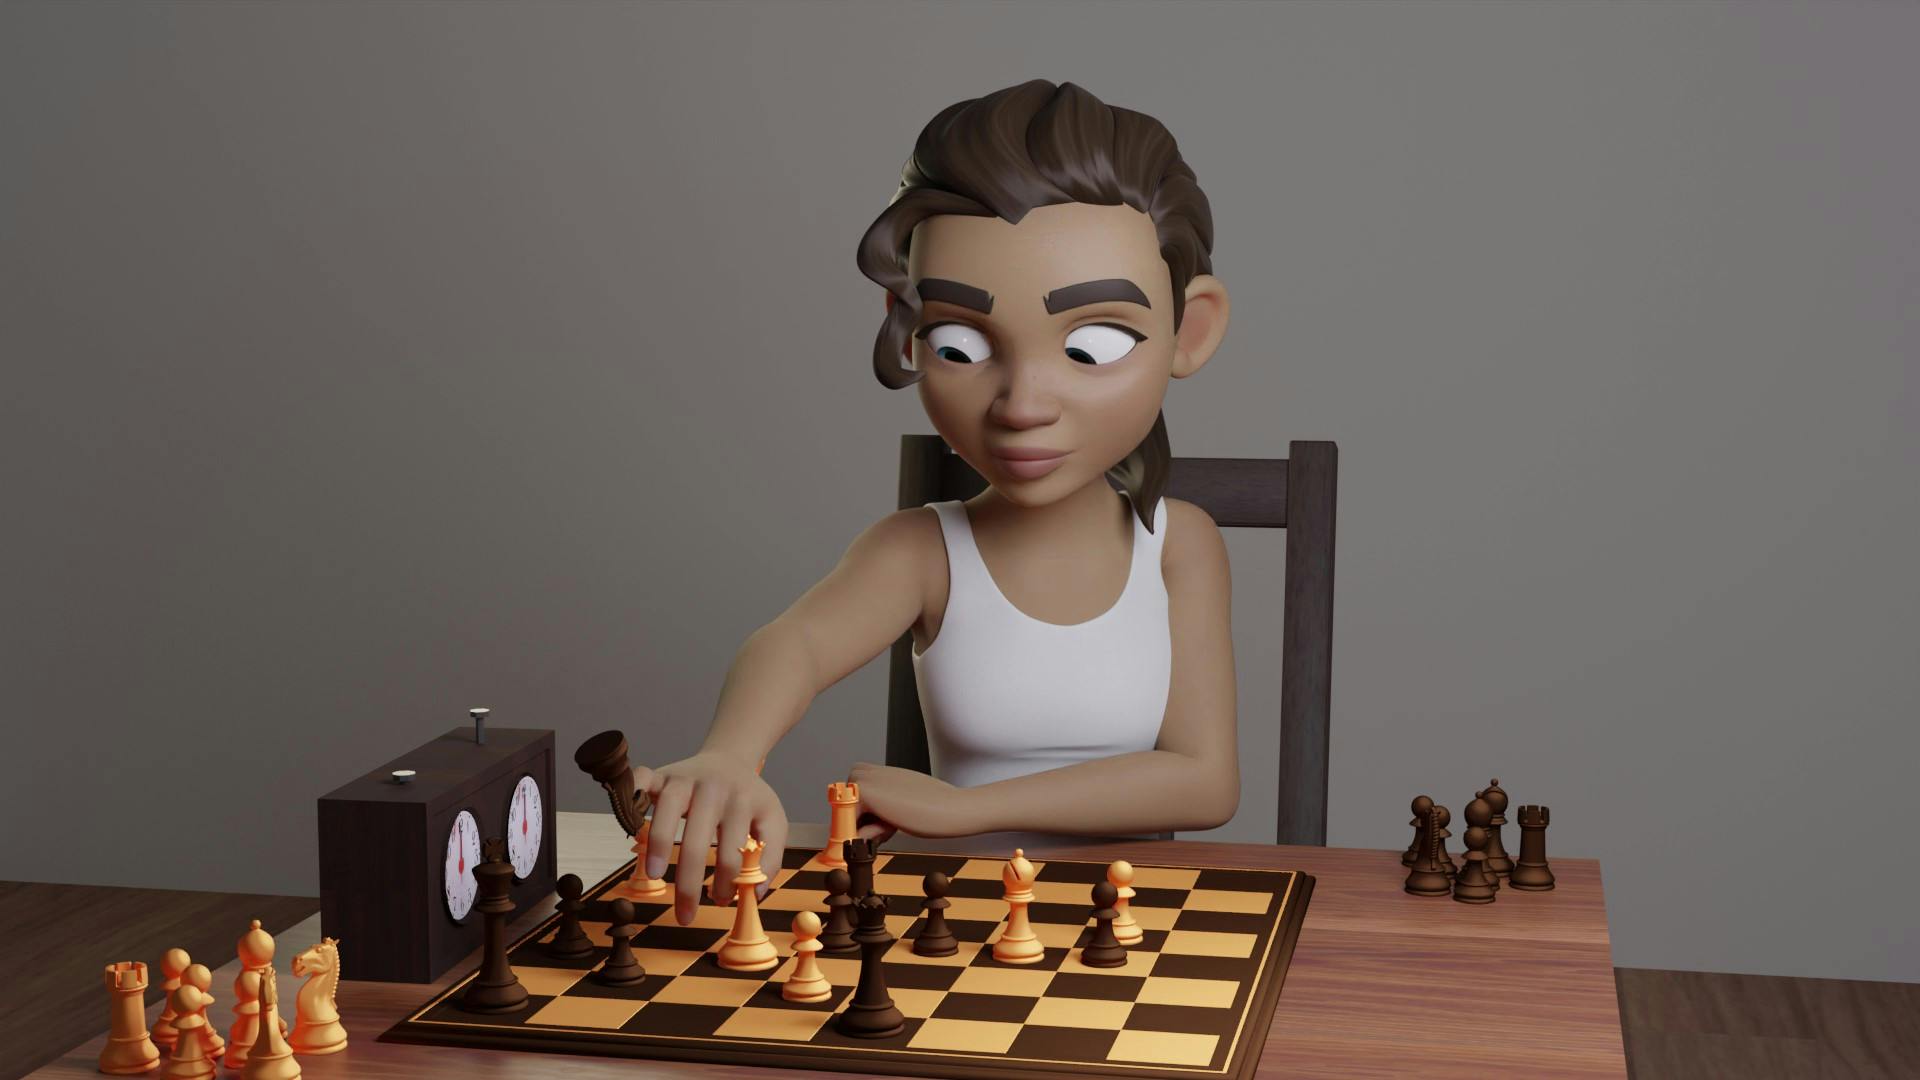 image of a 3D animated scene of a girl playing chess